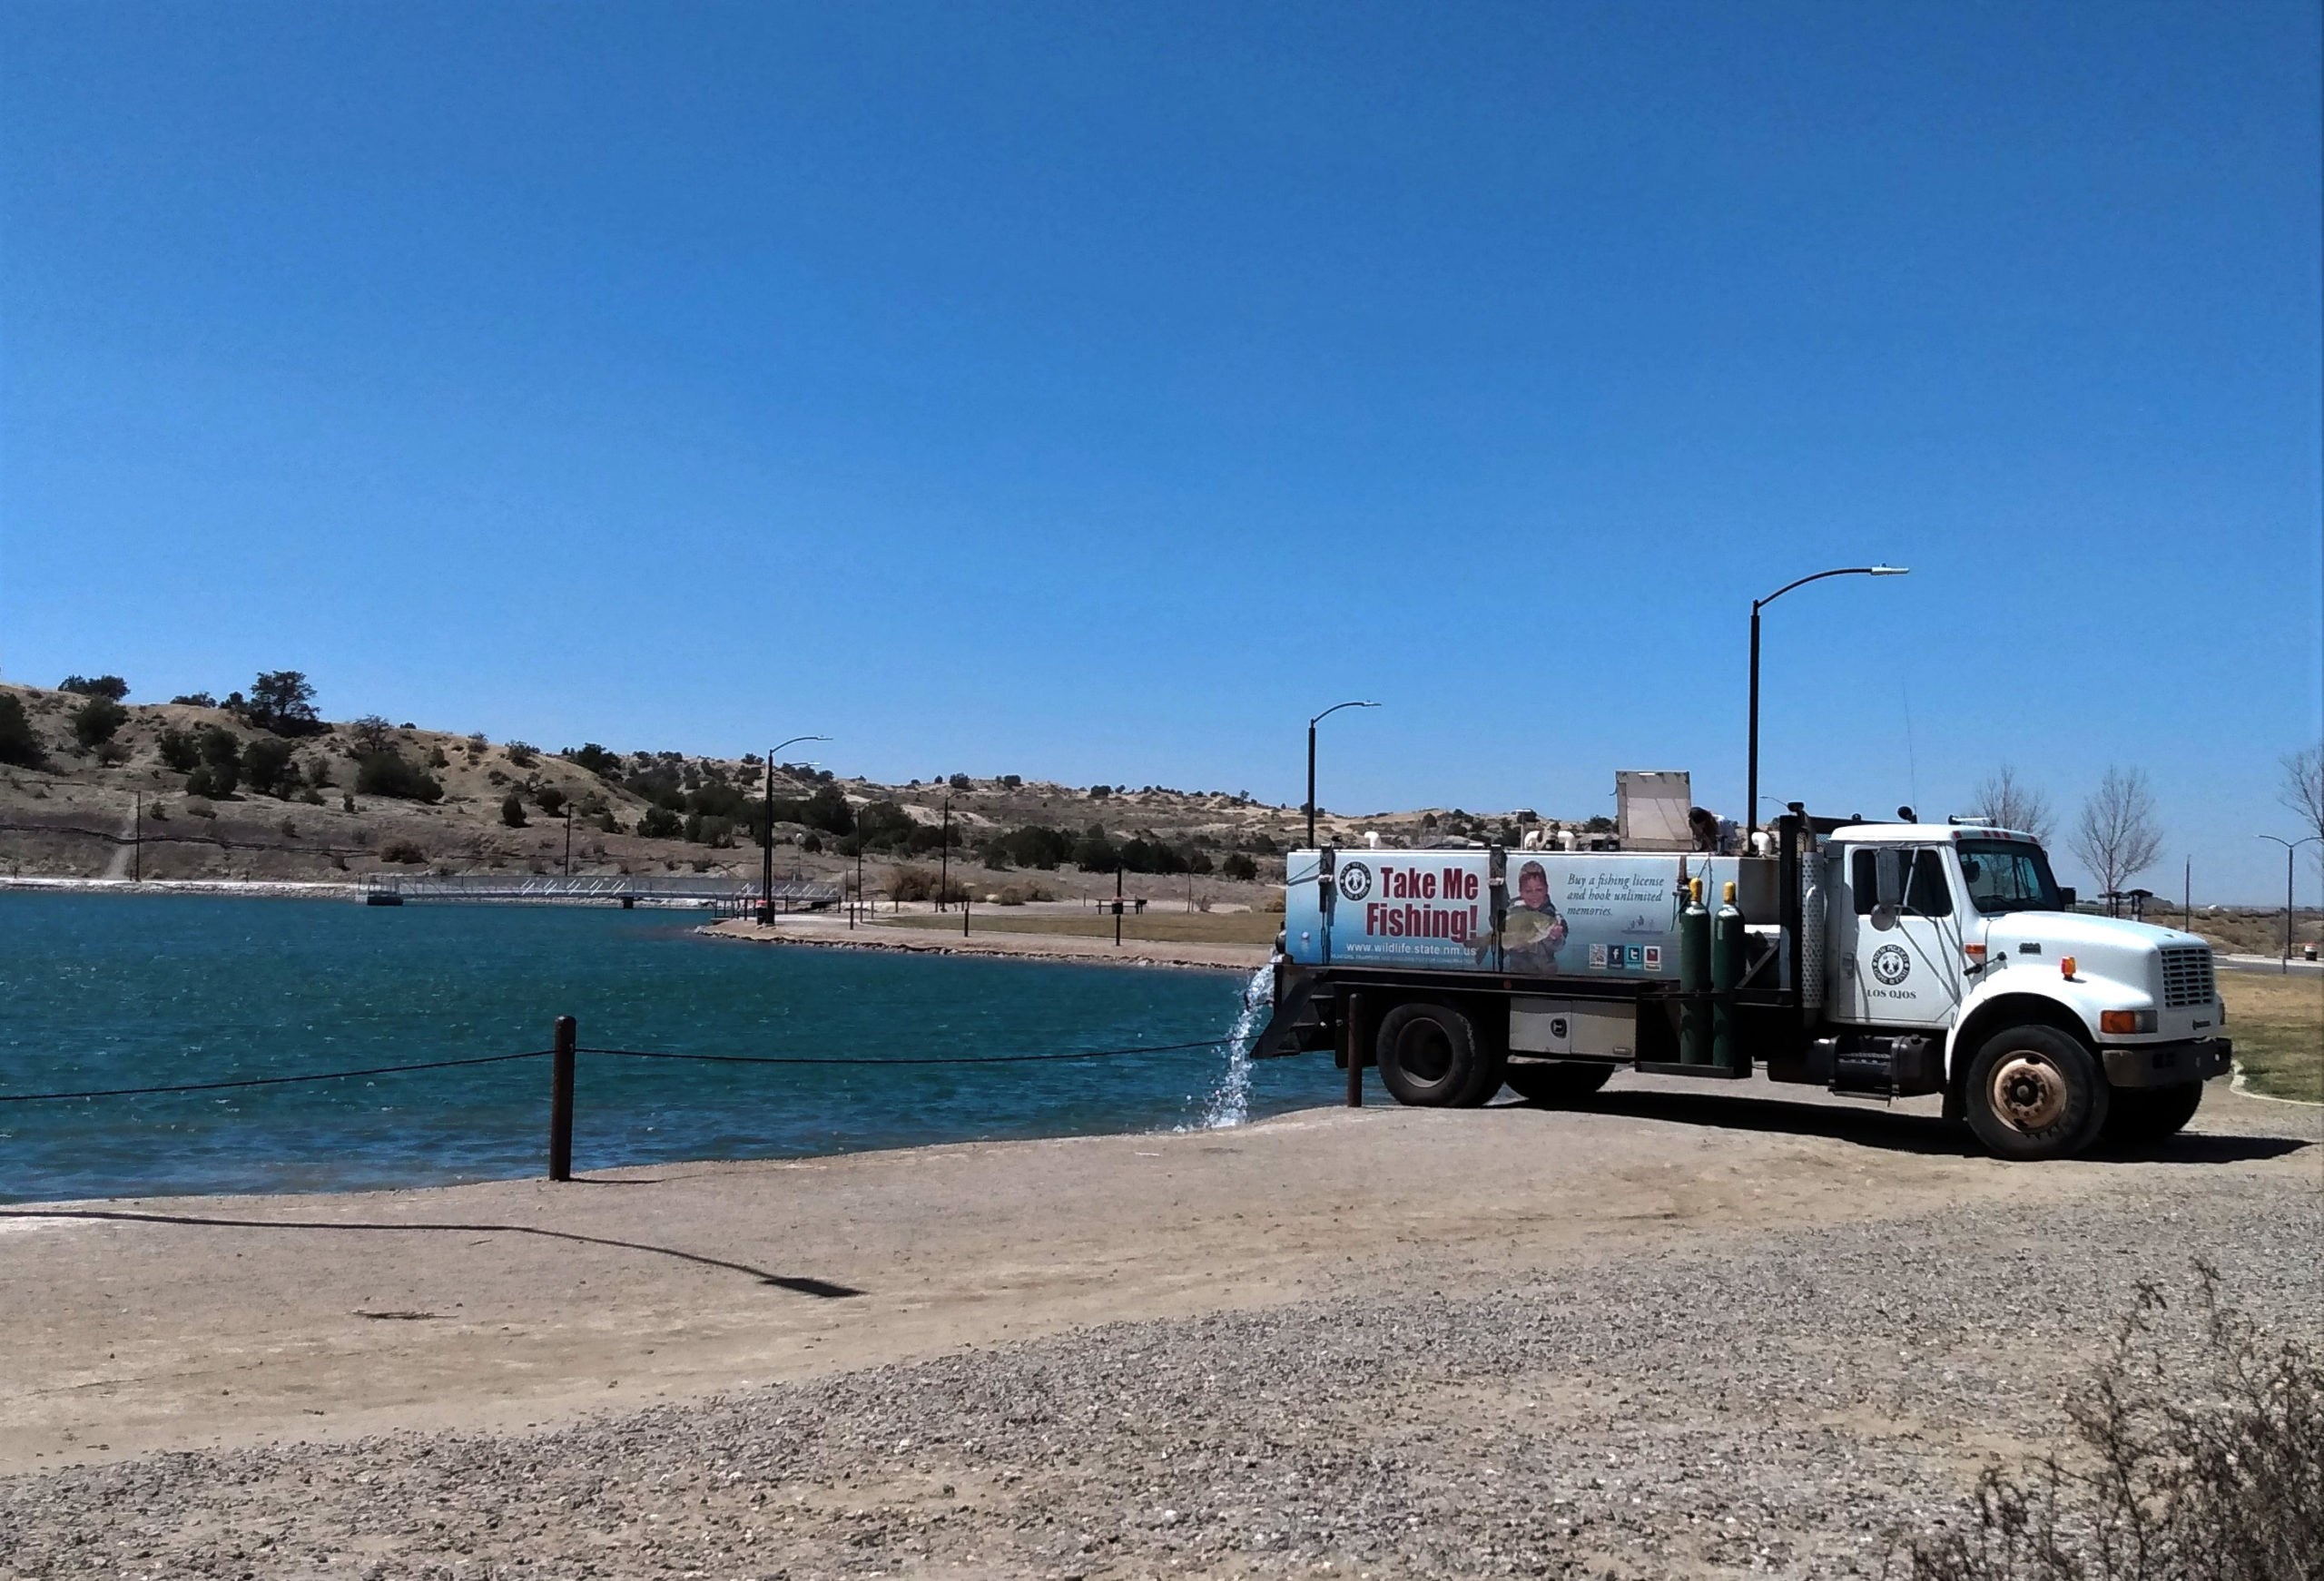 Fisheries rule update may open remote creek for fishing - NM Political  Report